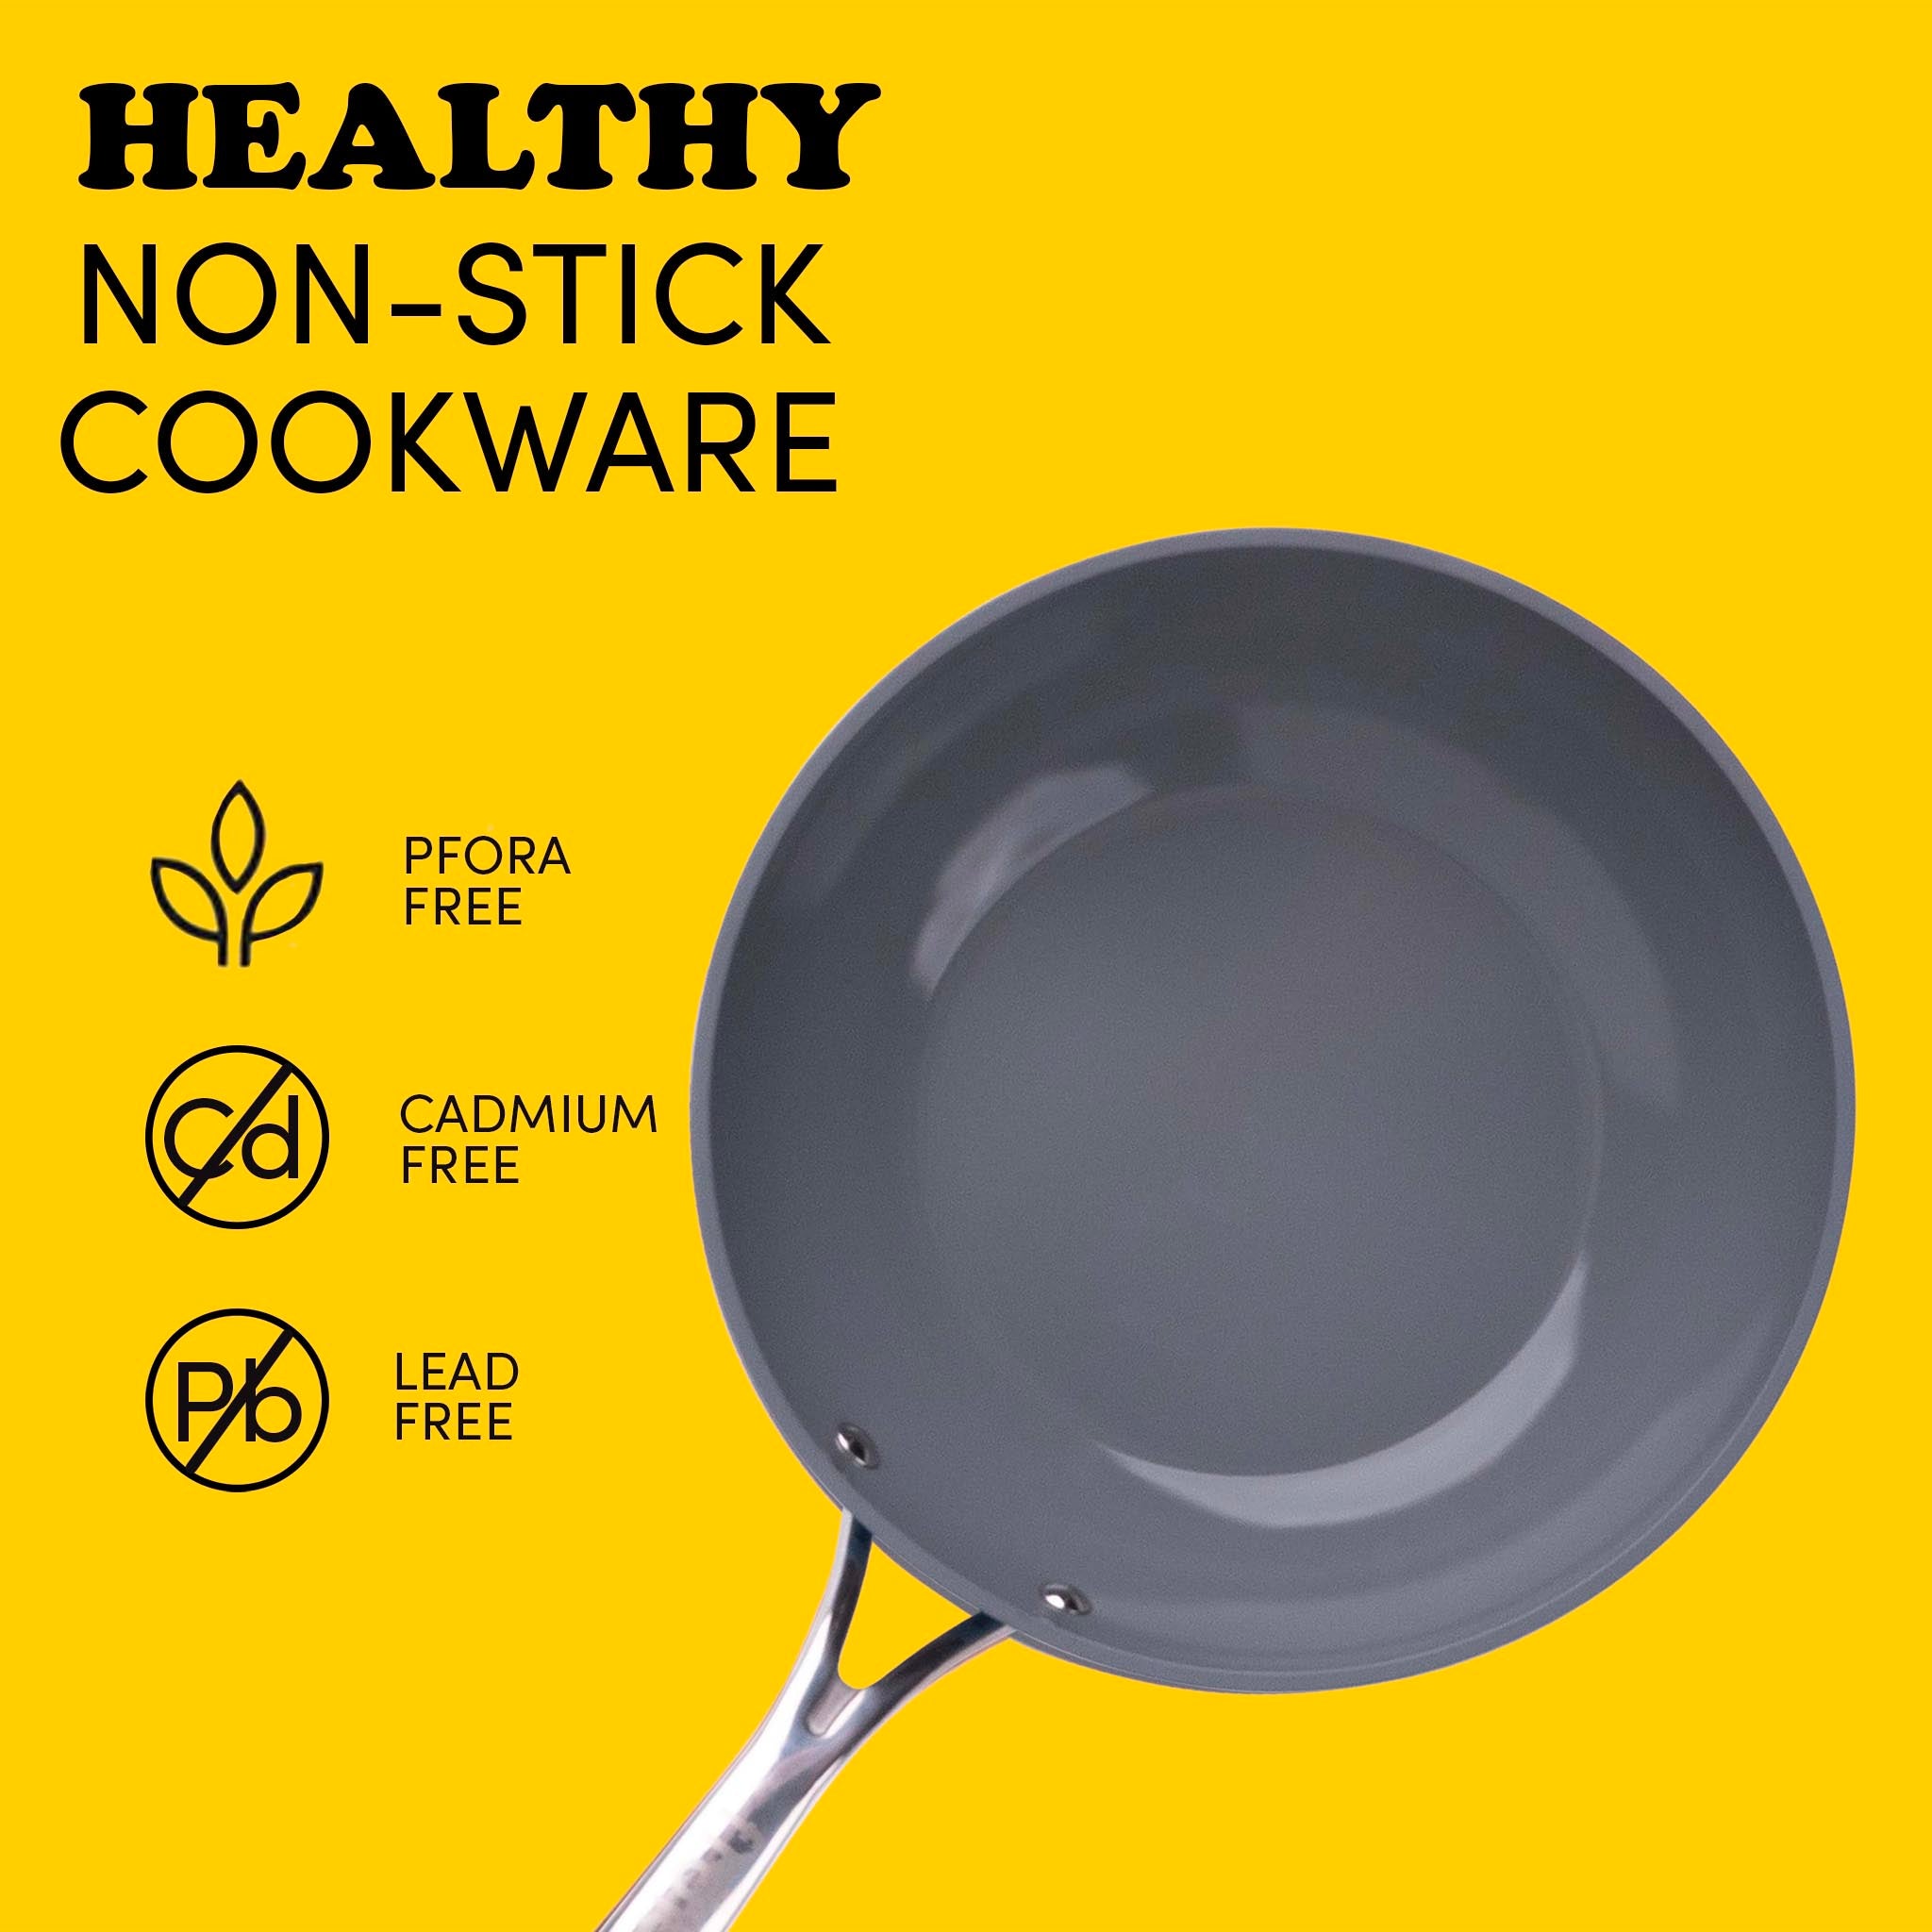 Tasty Ceramic Titanium-Reinforced Cookware Review - Consumer Reports